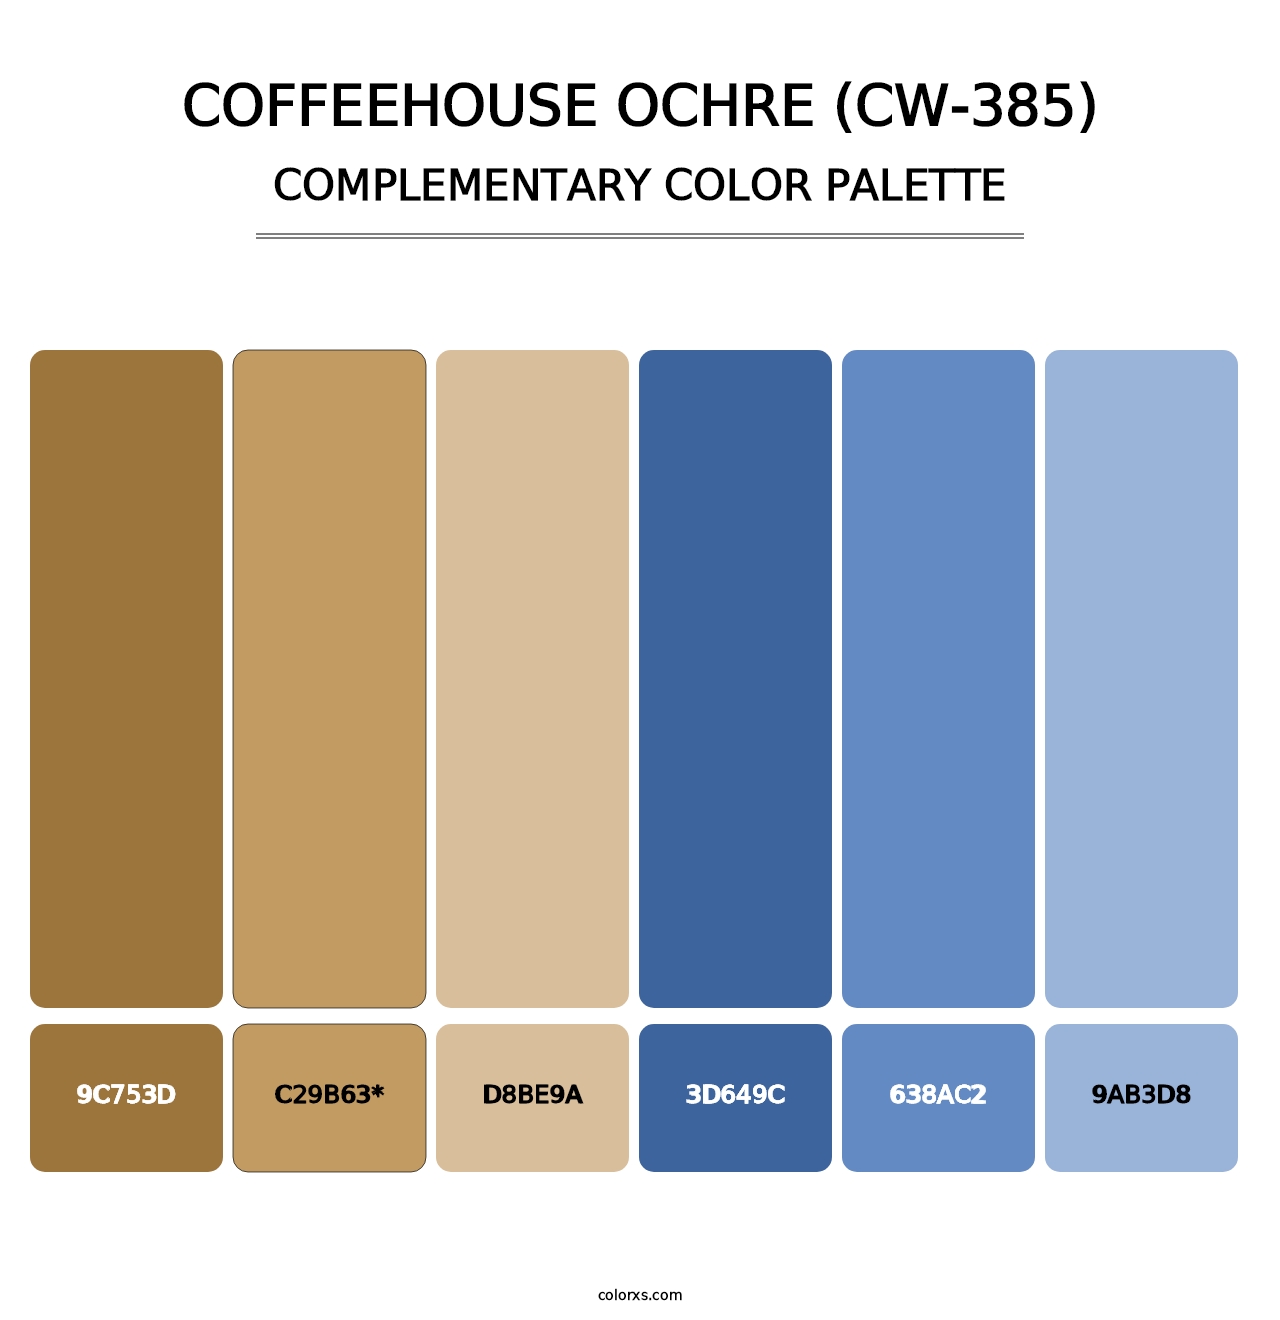 Coffeehouse Ochre (CW-385) - Complementary Color Palette